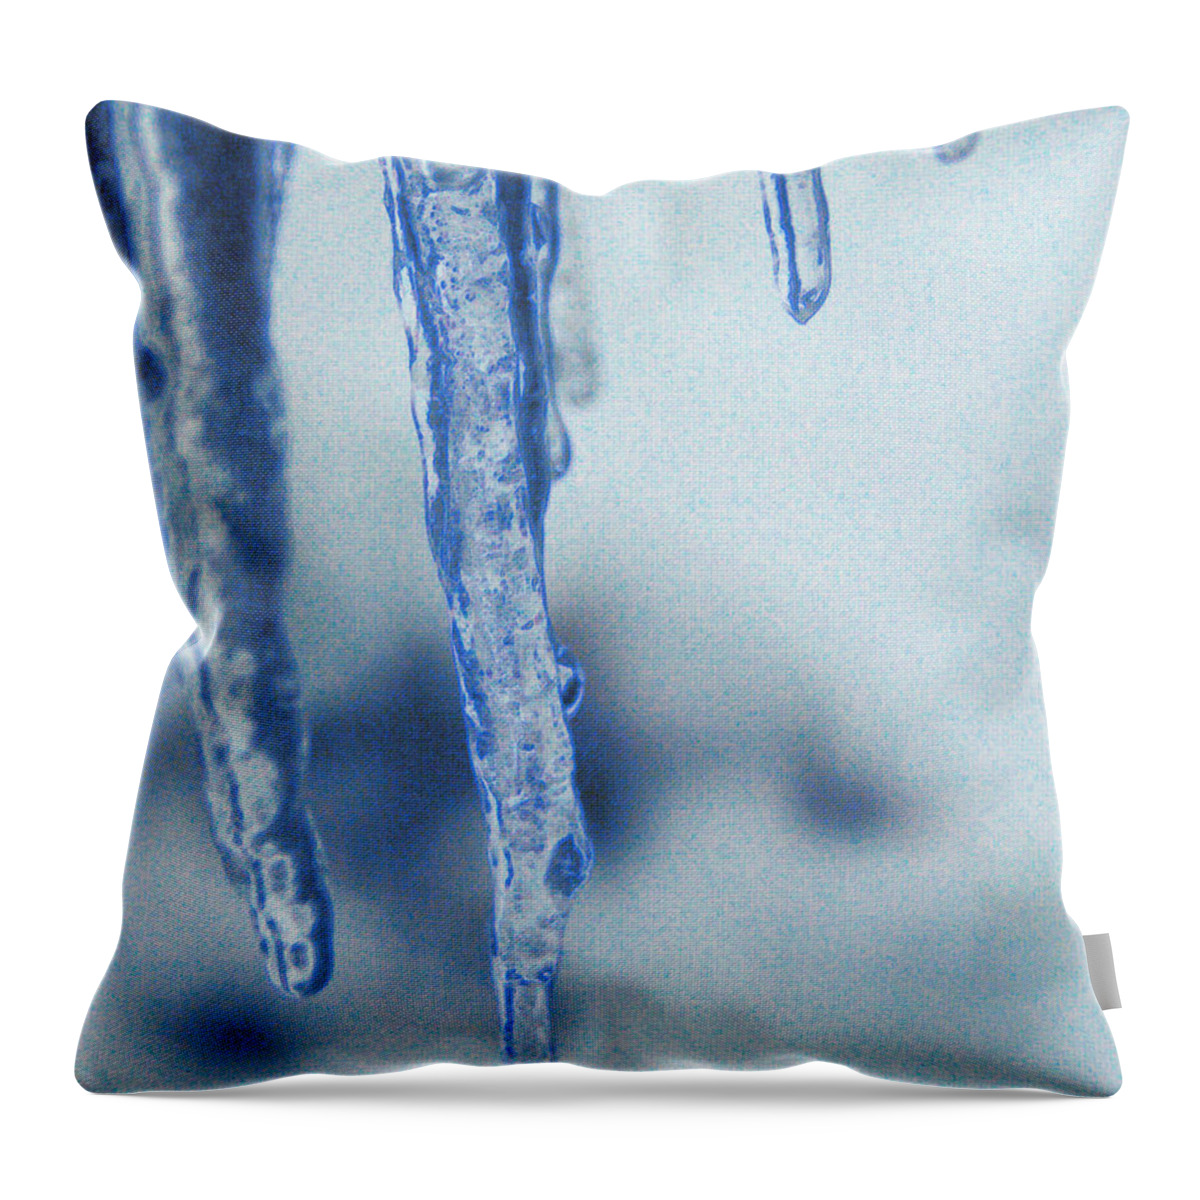 Blue Throw Pillow featuring the photograph Ice Ice Baby Blue by Michael Merry